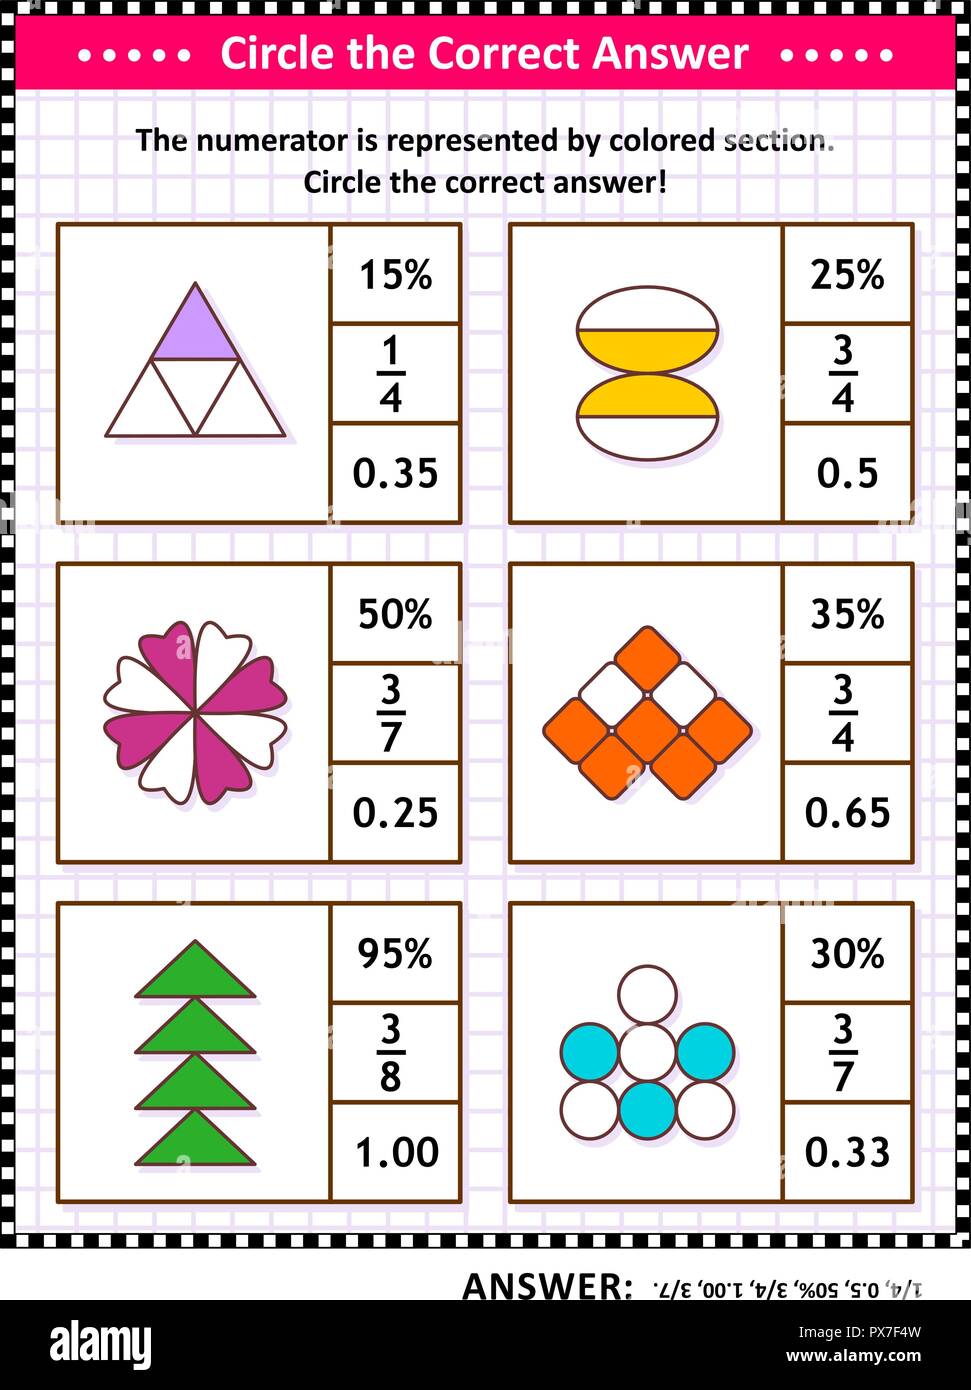 Math skills training visual puzzle. Circle the correct answer. Find the number equivalent for each pictorial fraction representation. Answer included. Stock Vector